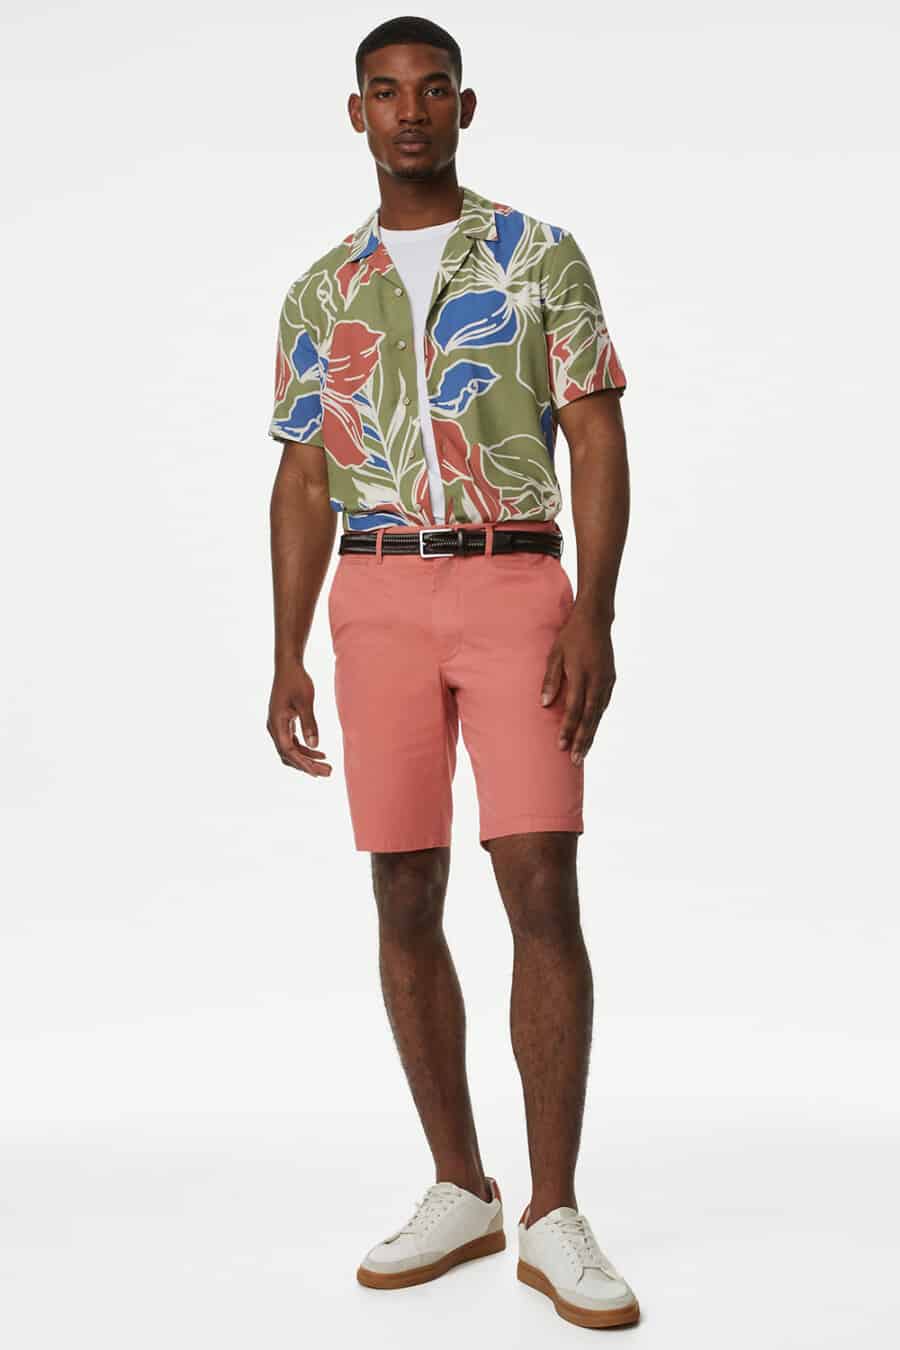 Men's pink shorts, tucked in green patterned short sleeve shirt, white T-shirt and off-white gum sole sneakers outfit